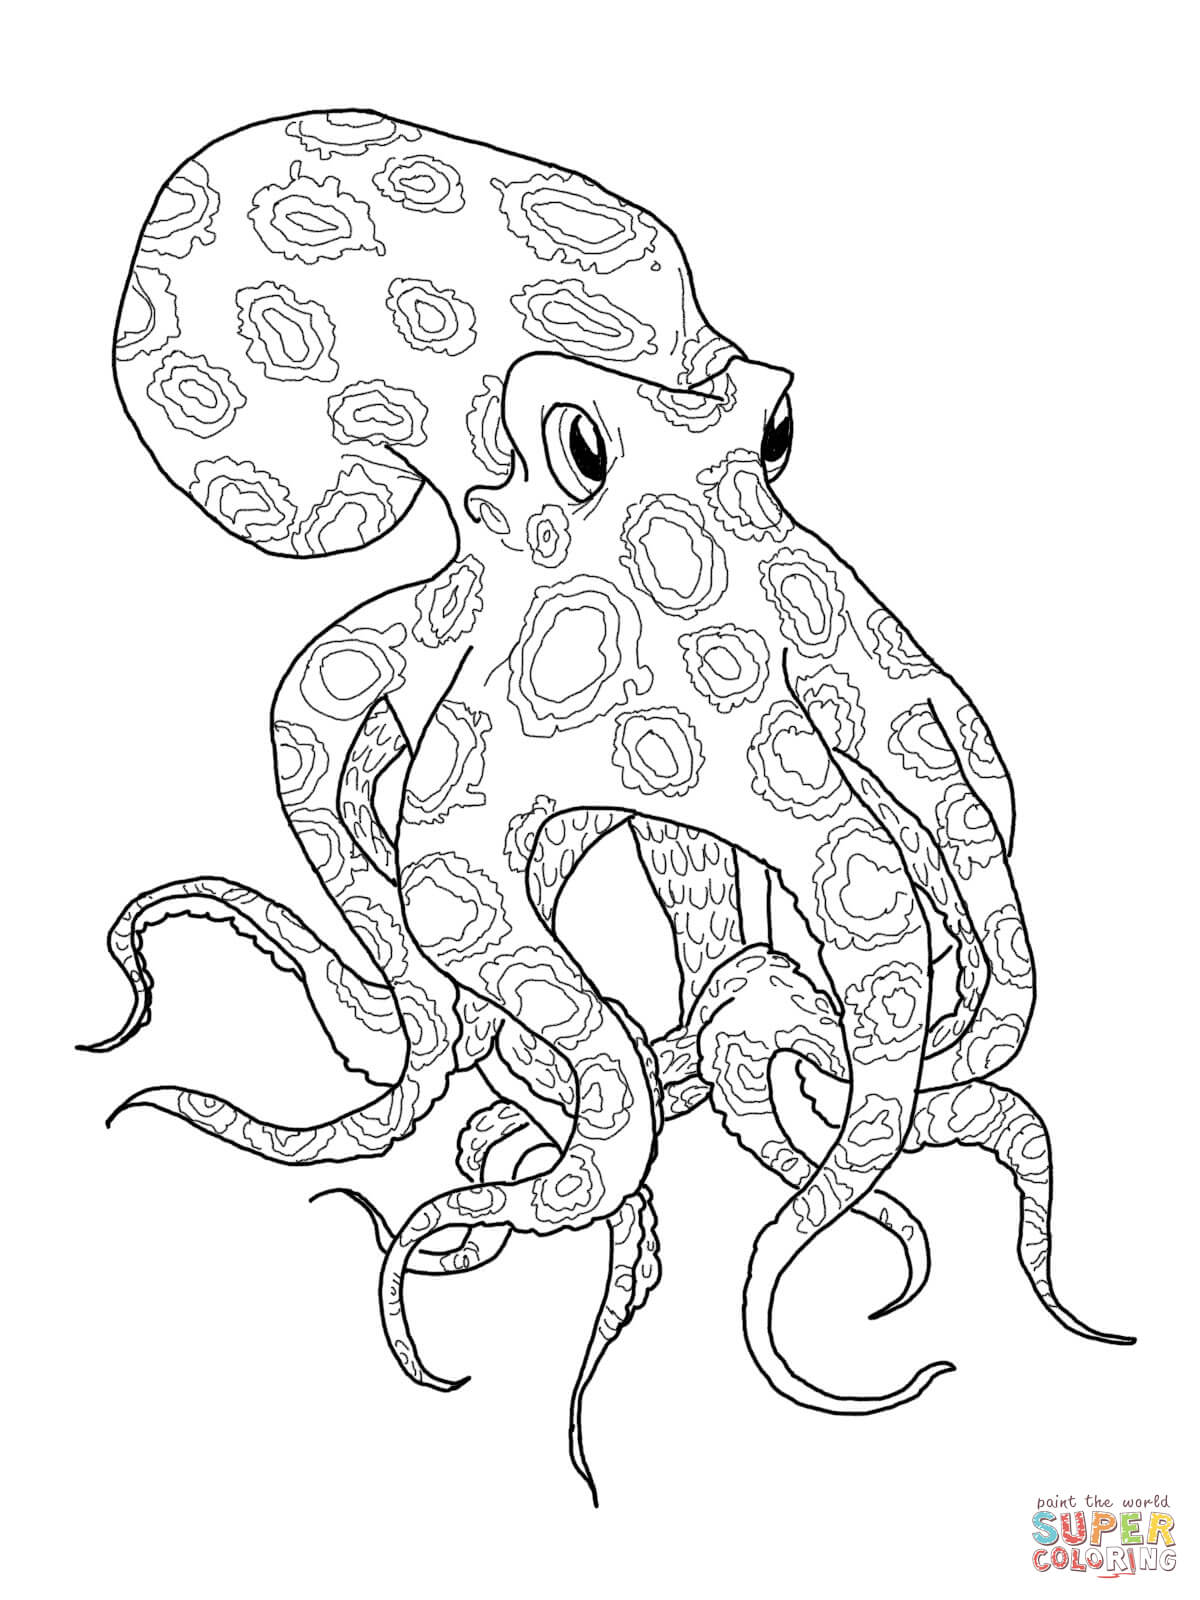 Octopus Coloring Pag. 